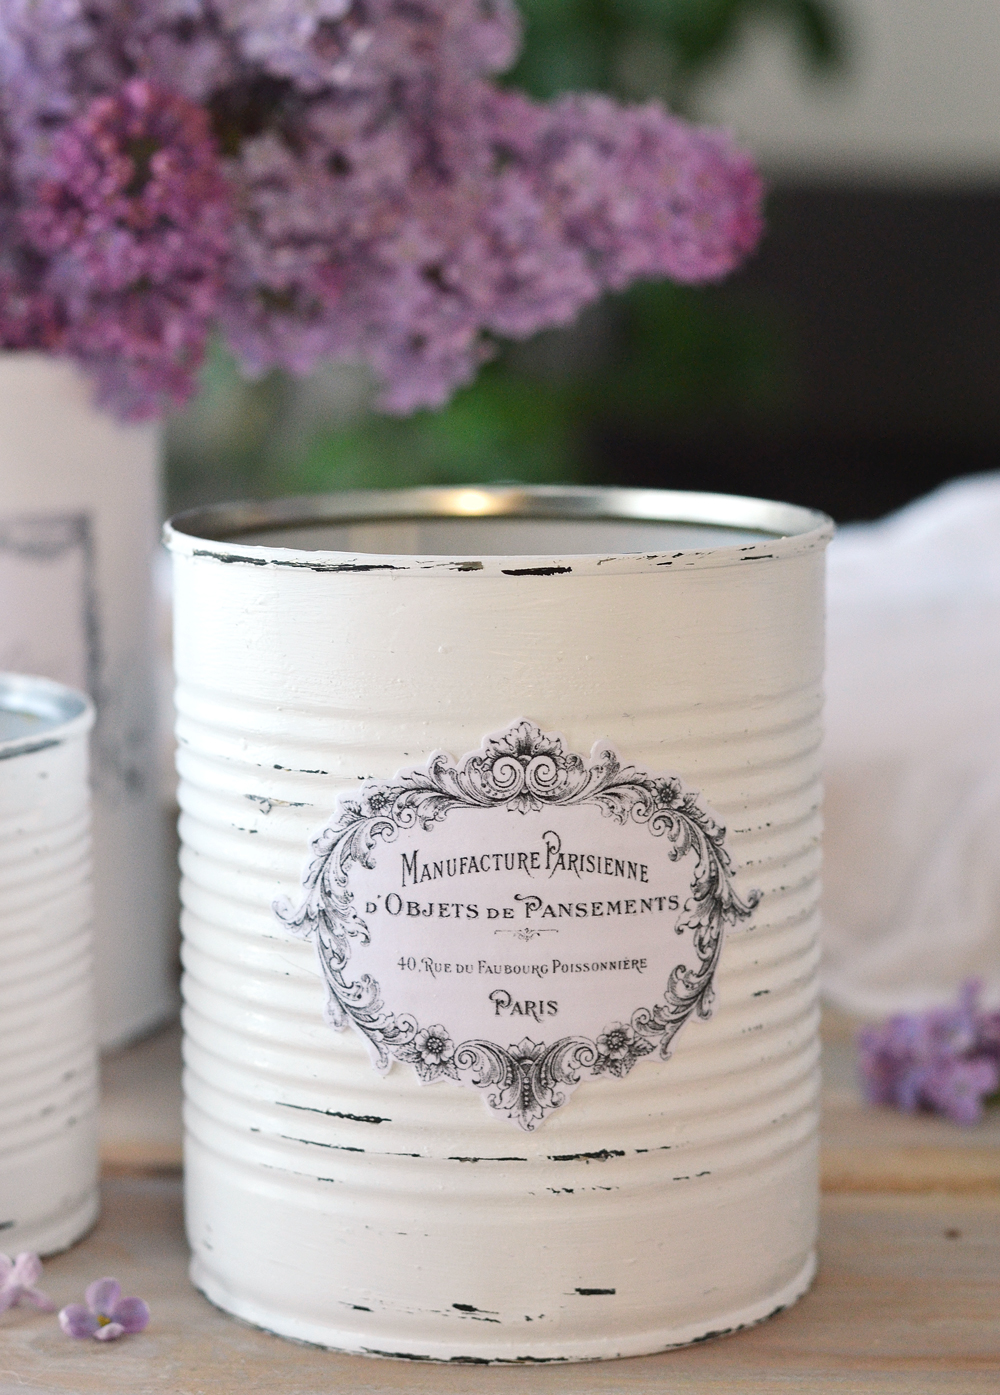 DIY French Recycled Tin Cans - free printable www.bydreamsfactory.com #diy #vintage #french #recycled #freeprintable 